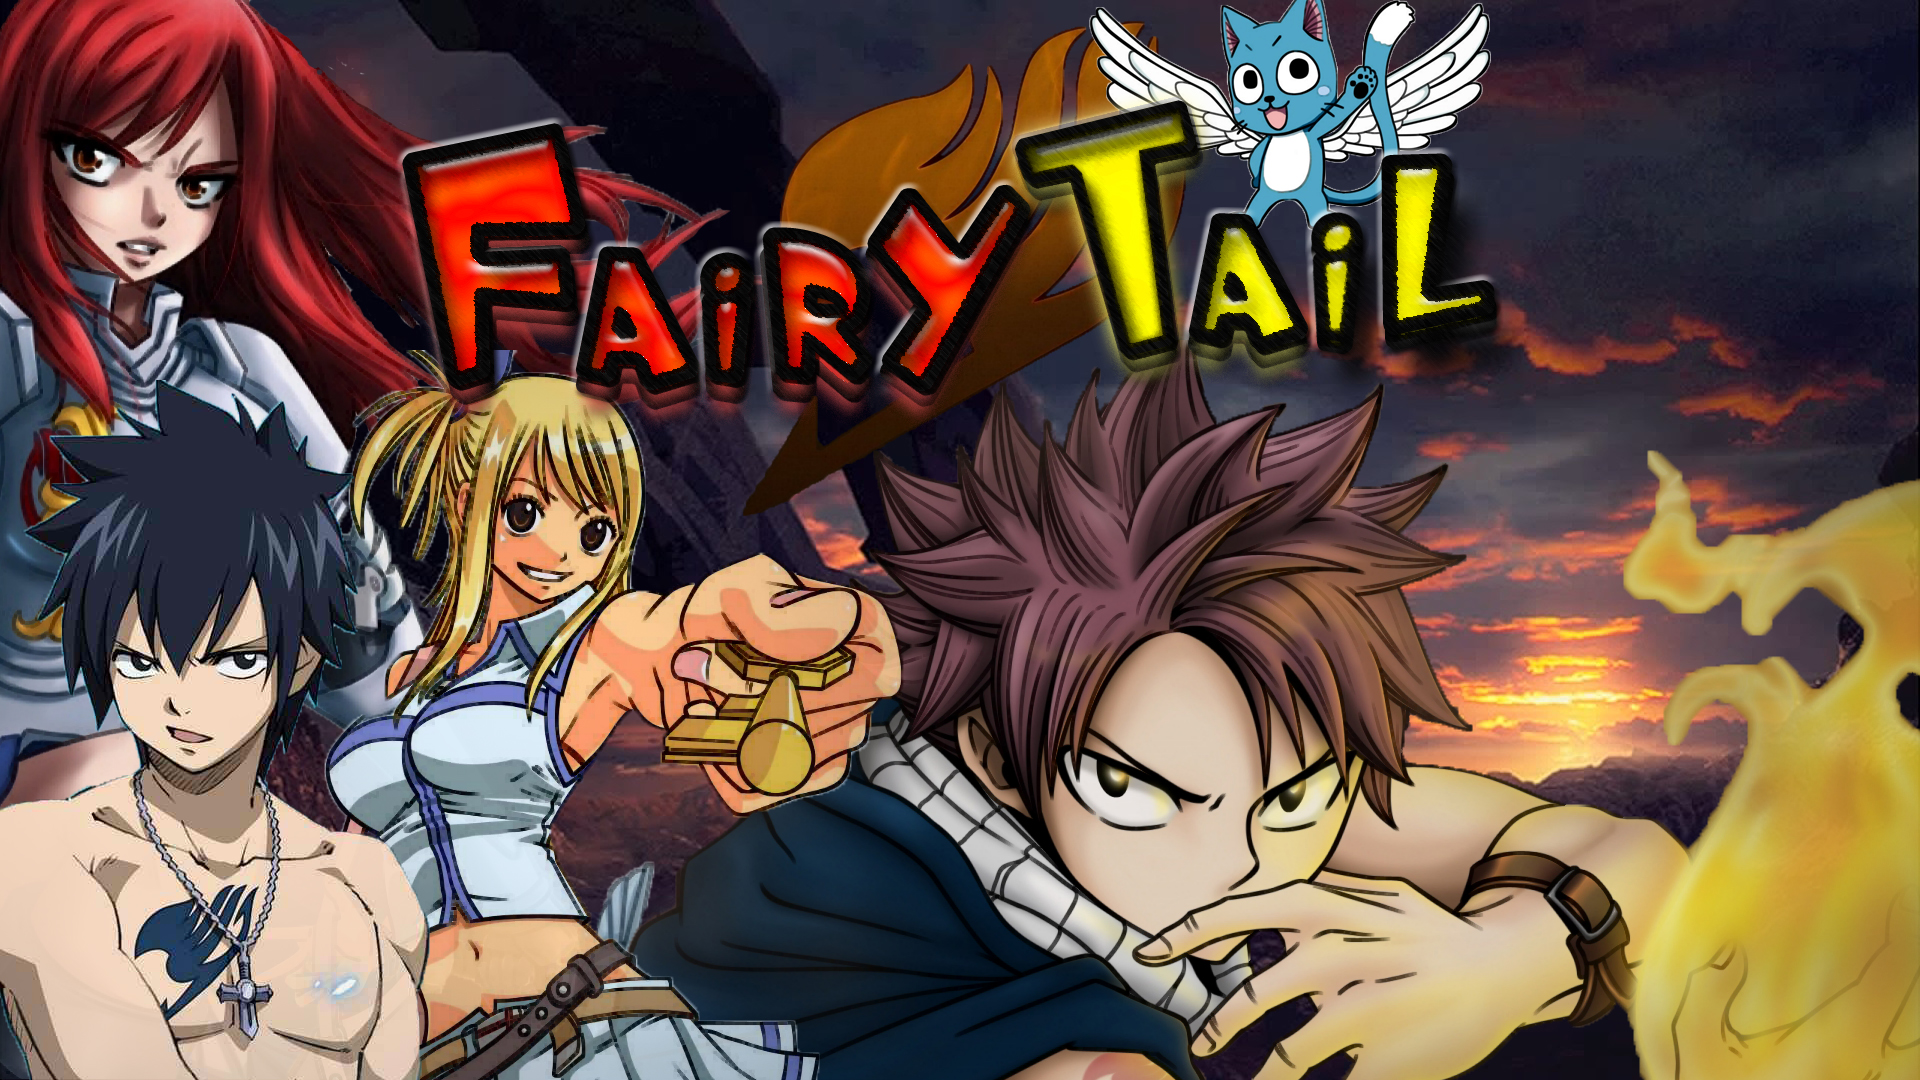 Fairy Tail Group wallpaper 252431 1920x1080